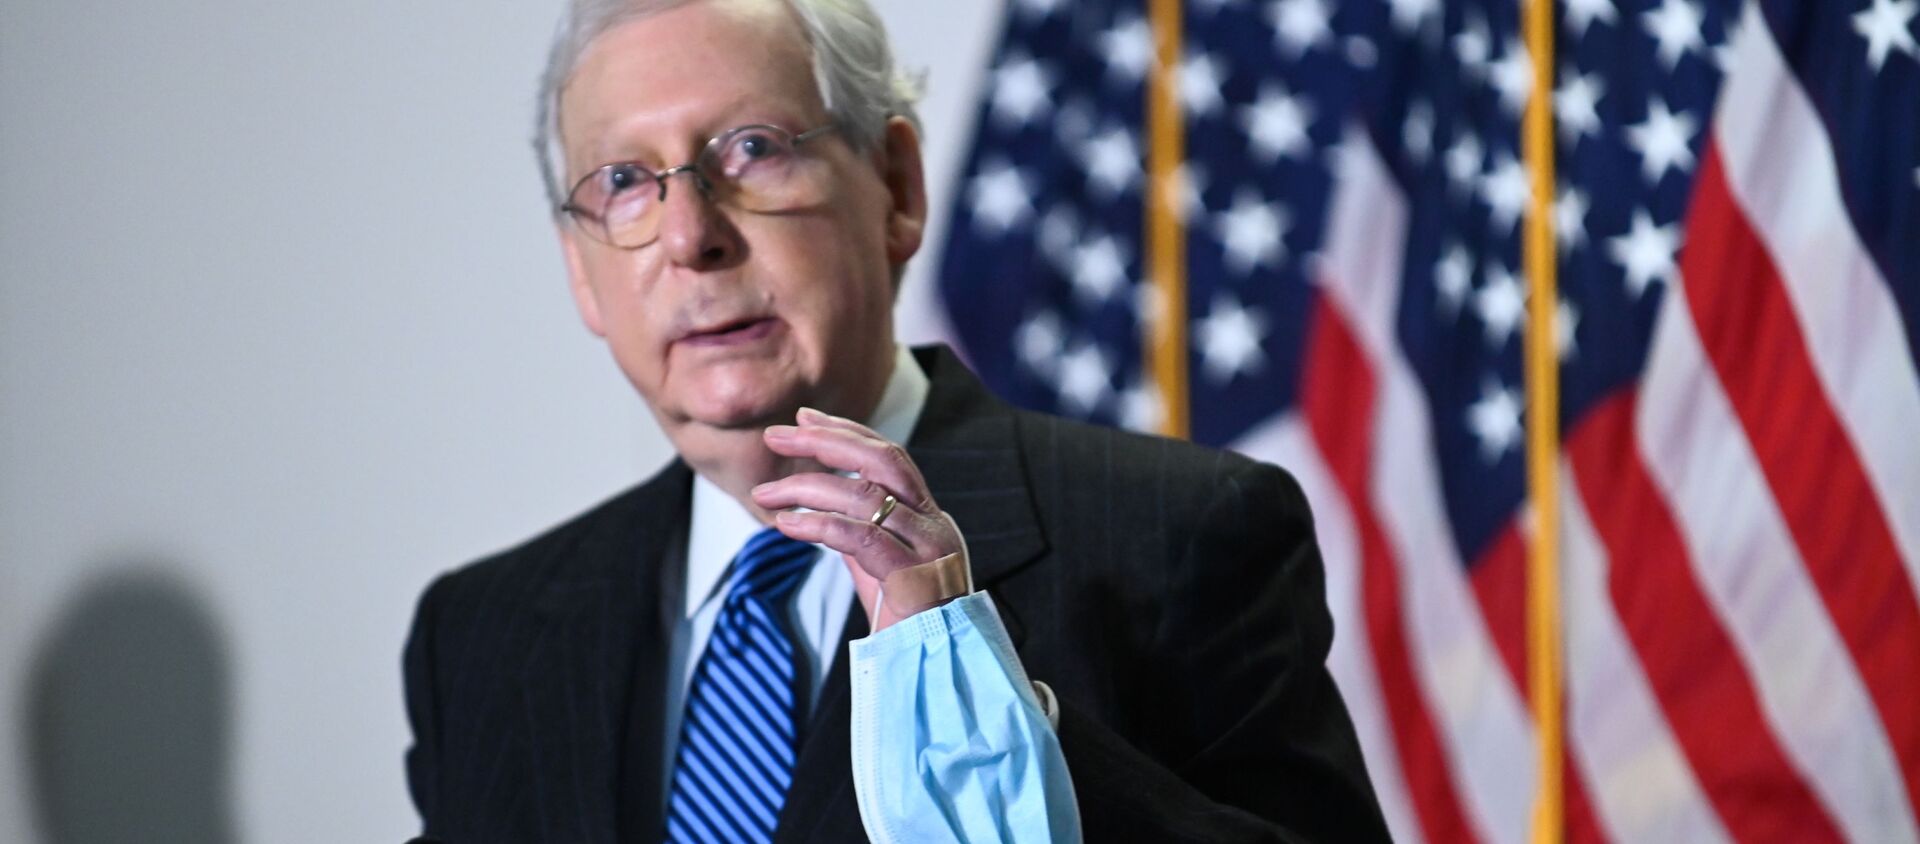 Senate Majority Leader Mitch McConnell (R-KY) holds a face mask while participating in a news conference at the U.S. Capitol in Washington, U.S., October 20, 2020. - Sputnik International, 1920, 23.10.2020